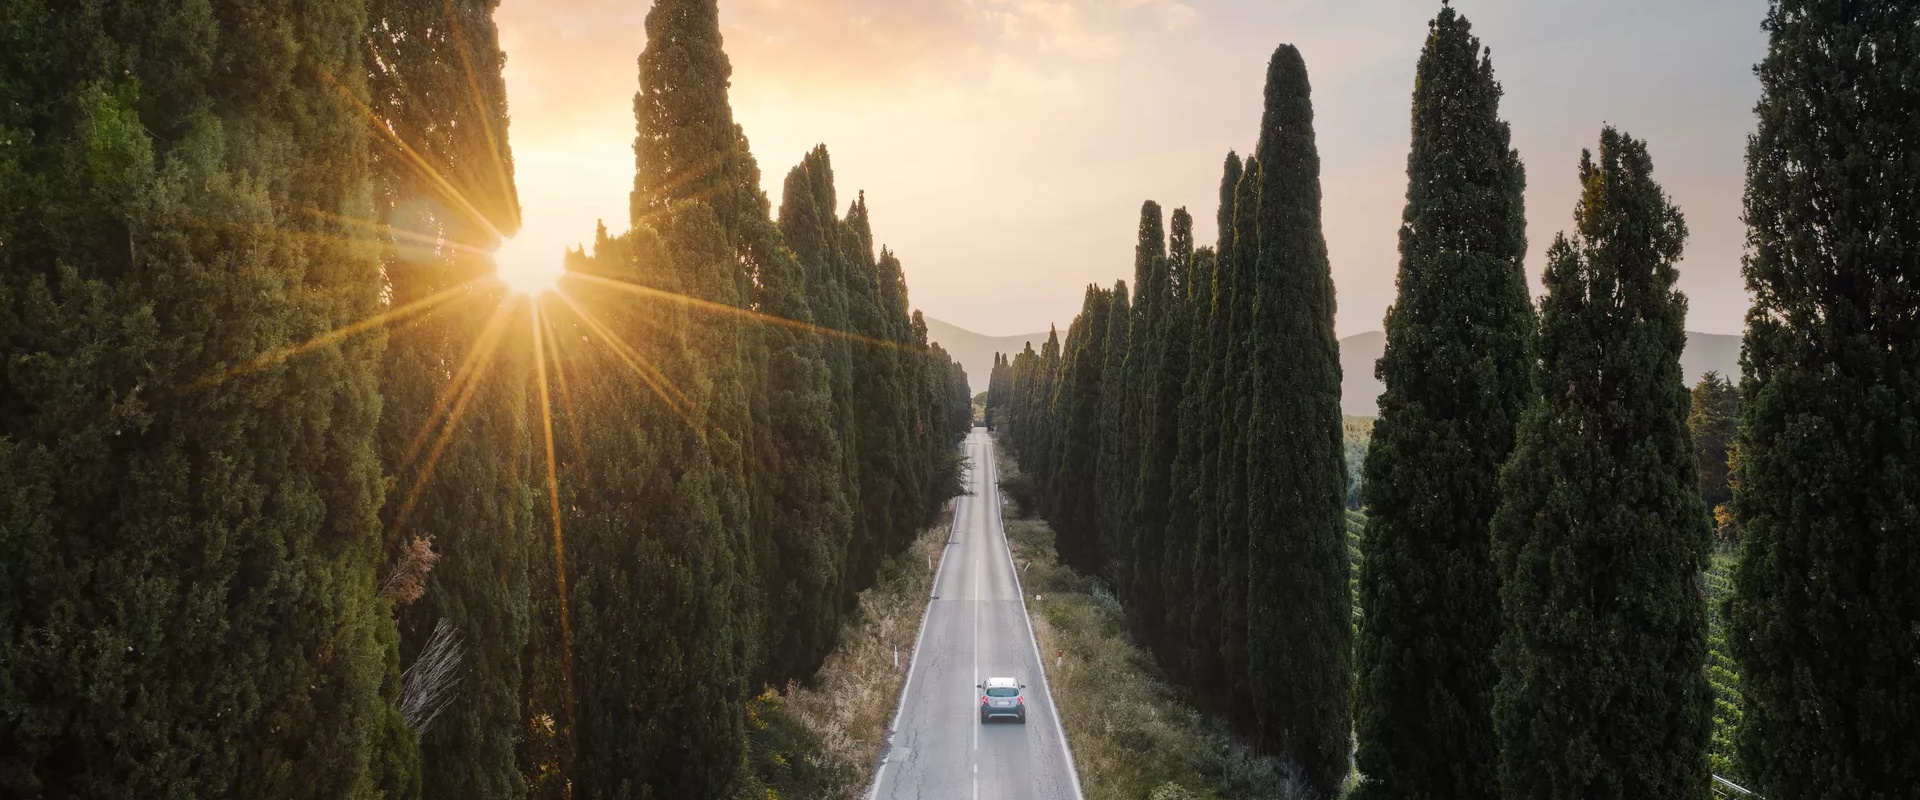 Tree-lined road at sunset